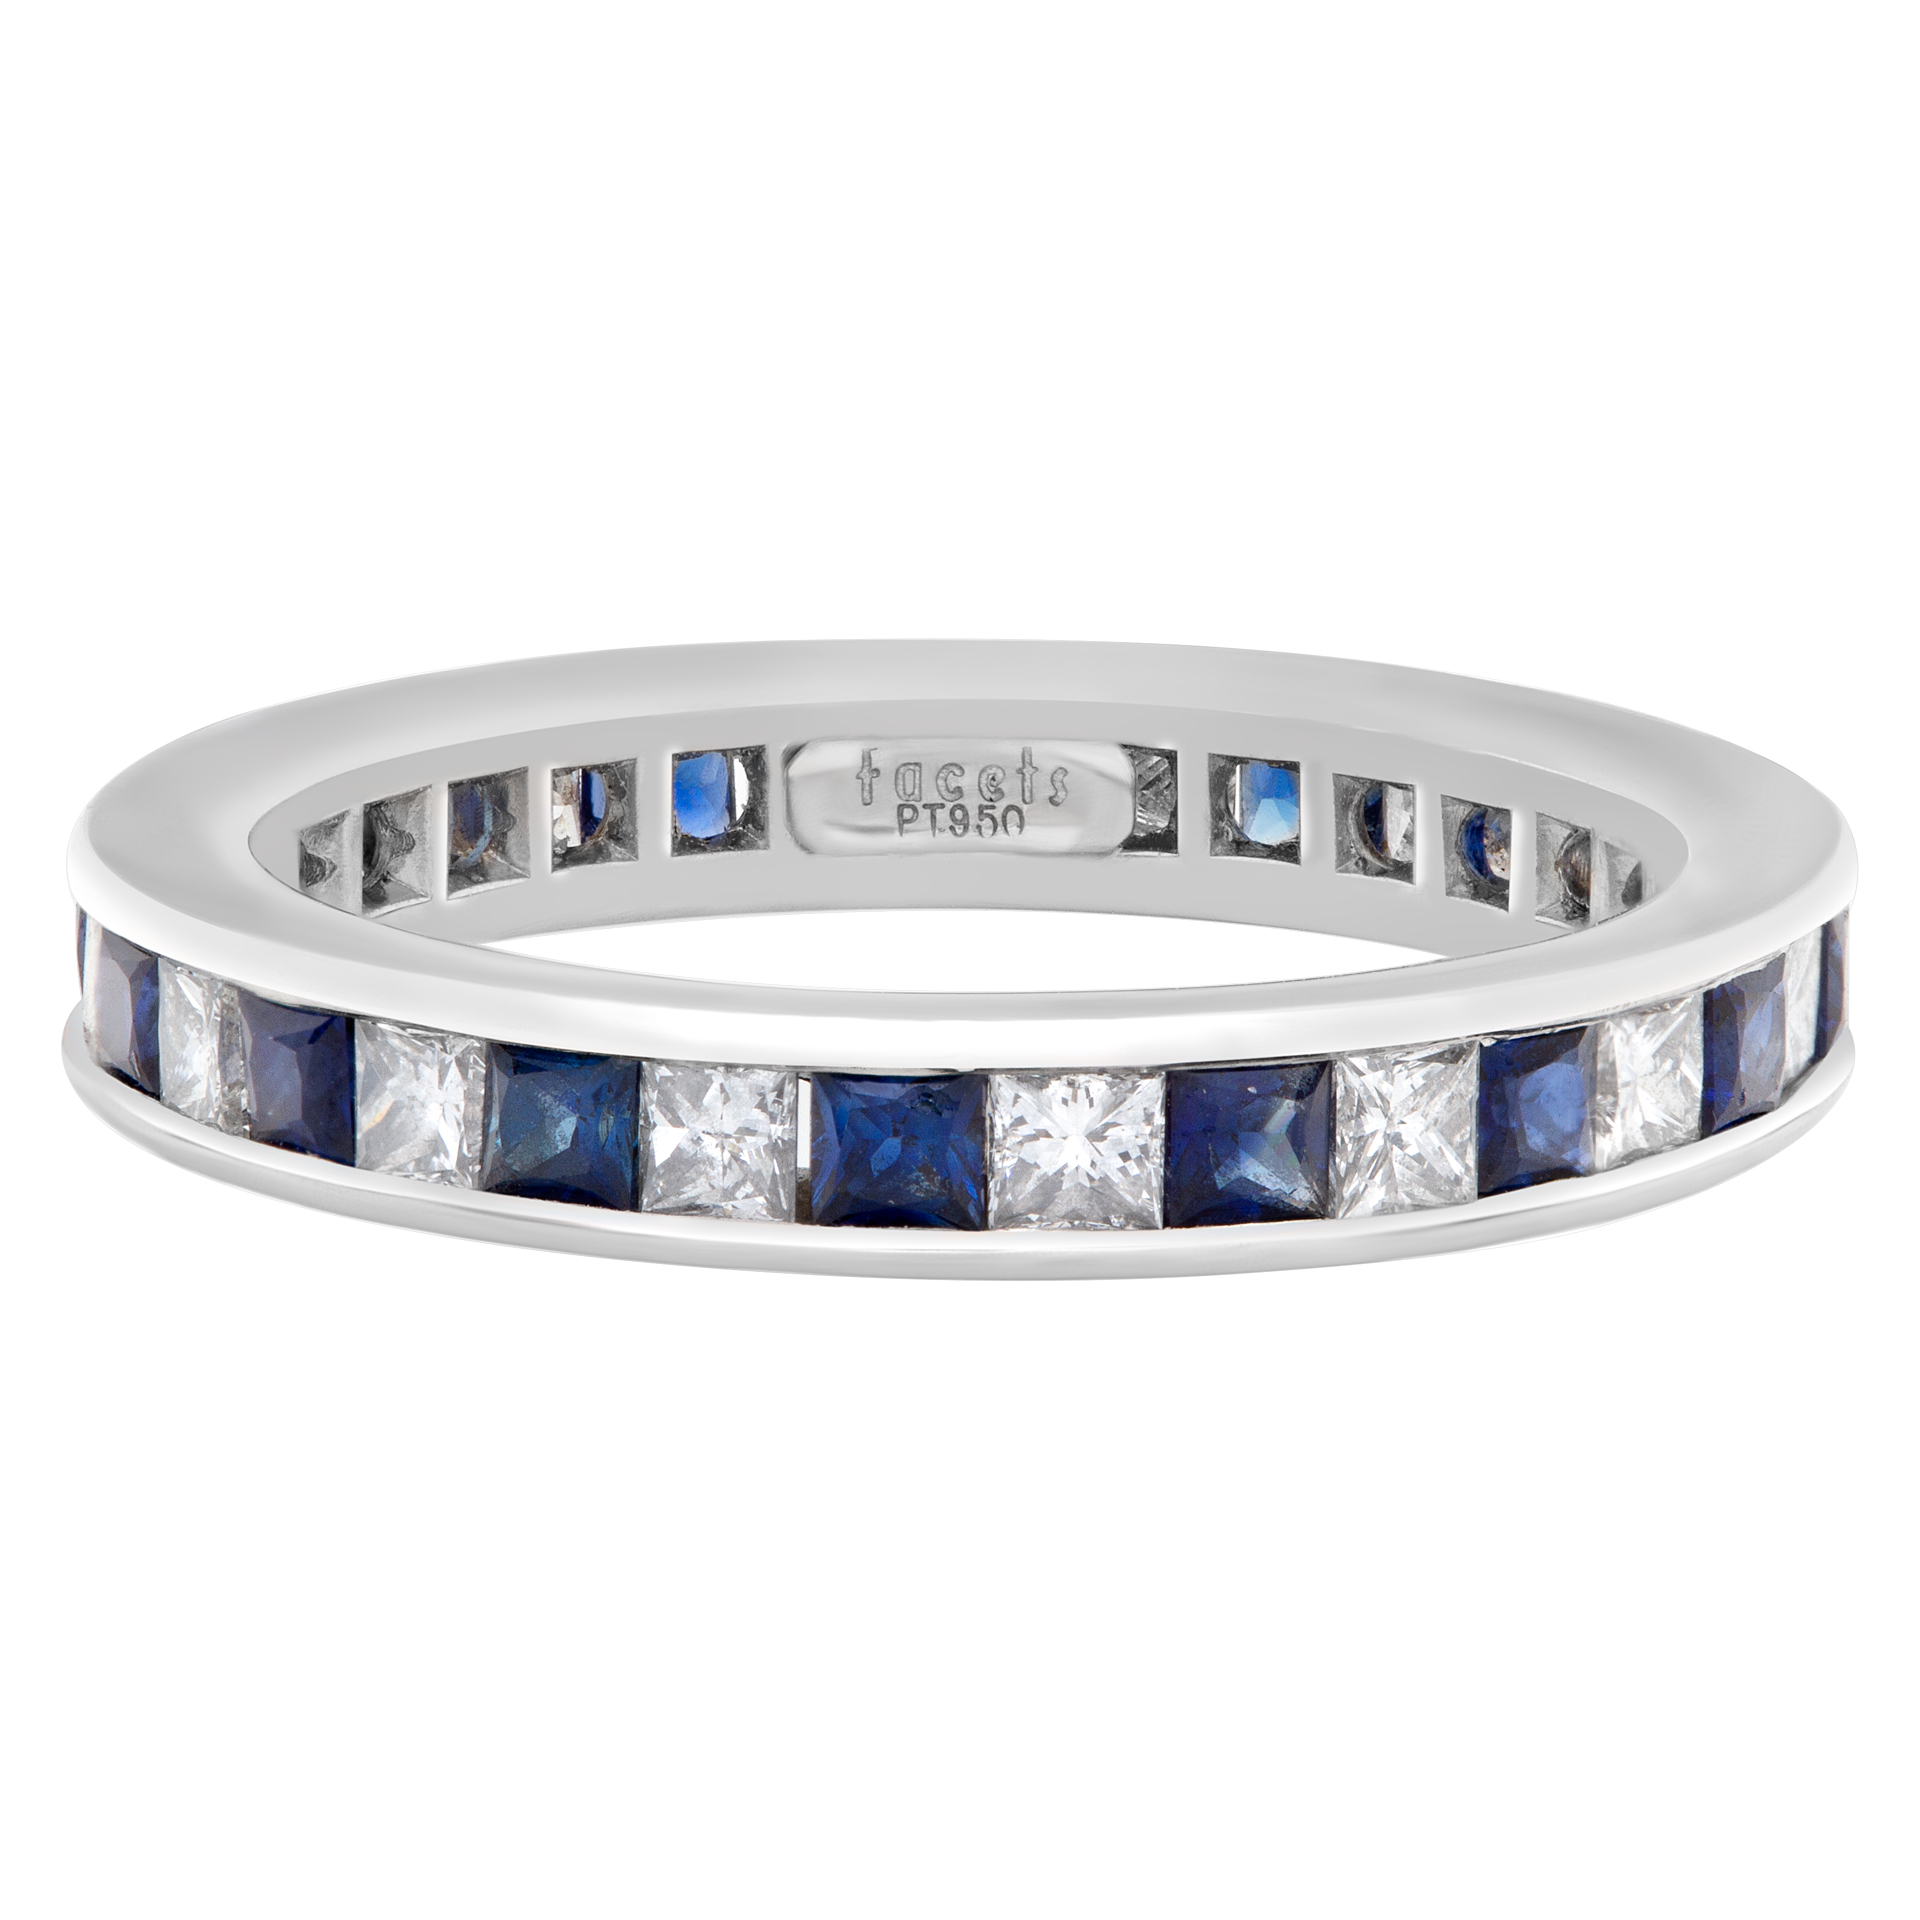 Diamond Eternity Band and Ring with sapphire in platinum; 1 carat in F-G color VS clarity princess cut diamonds & 1.50 carats in deep blue sapphires image 1